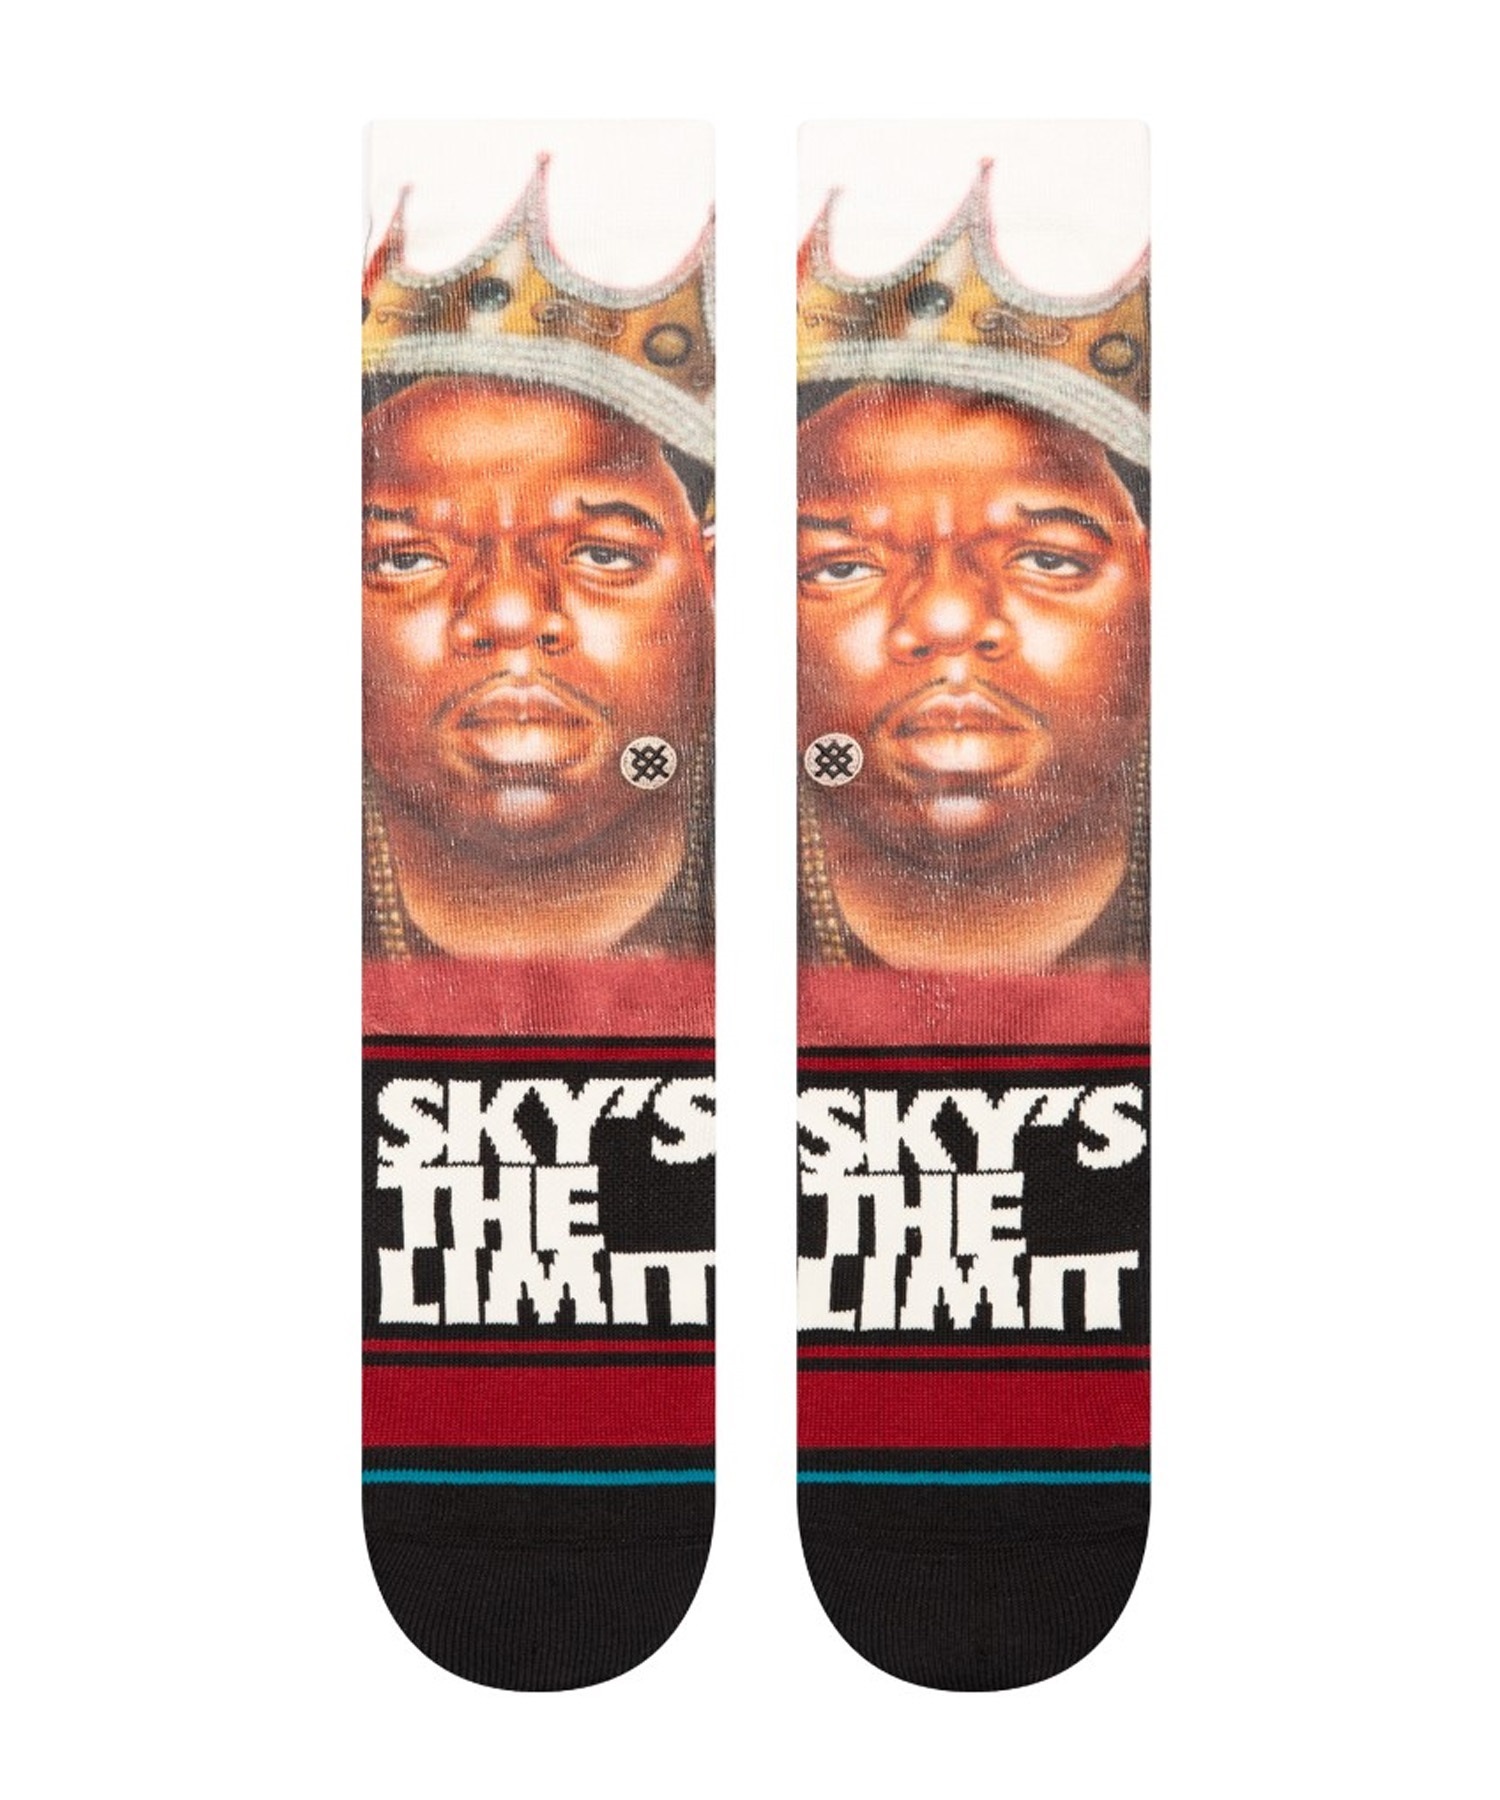 STANCE スタンス SKYS THE LIMIT ソックス 靴下 BIGGIE（ビギー）コラボモデル ノトーリアス・B.I.G The Notorious B.I.G. A555D23SKY(BLK-L)